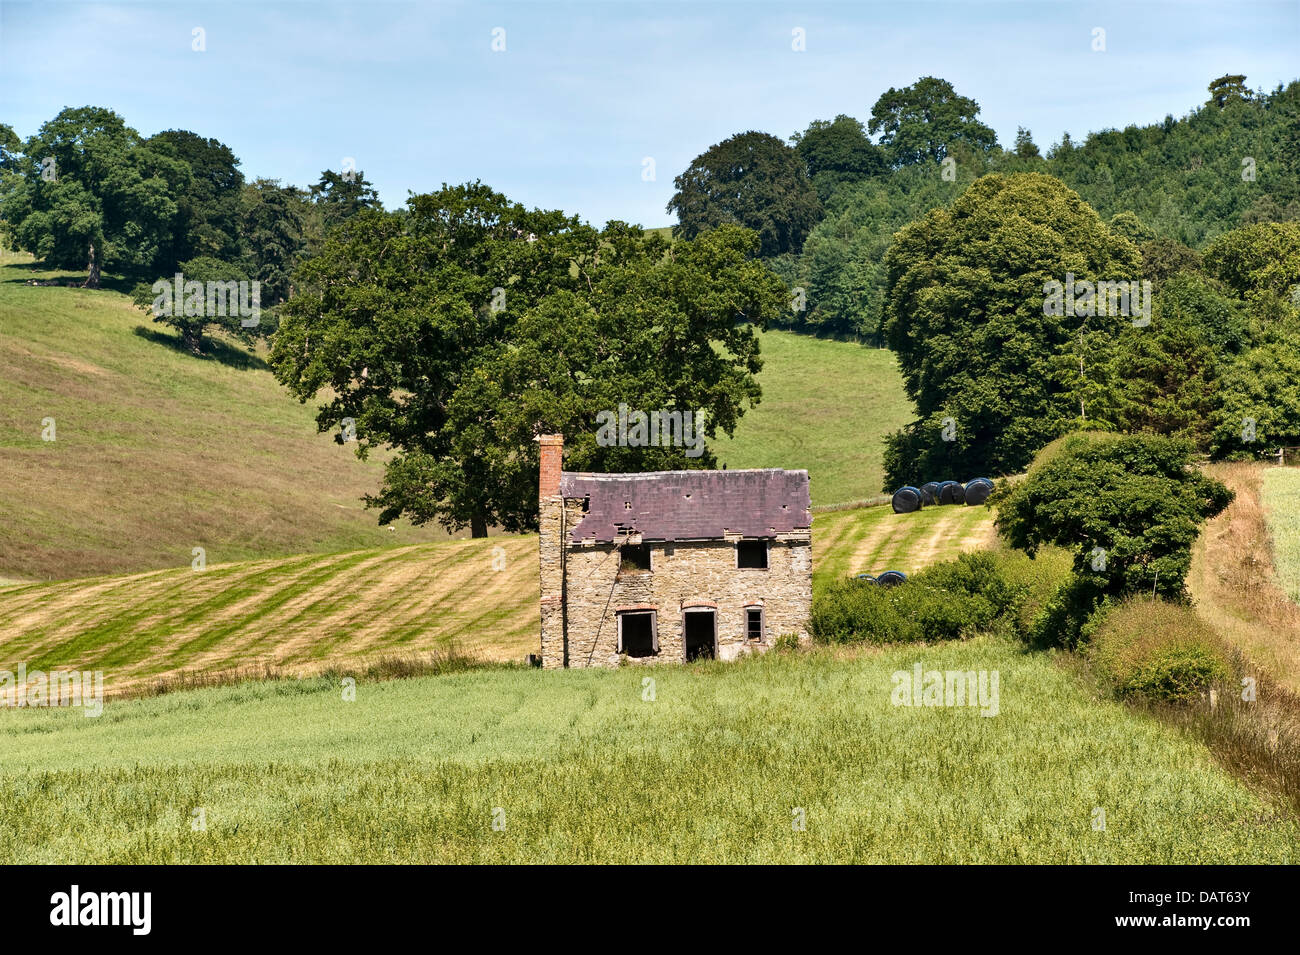 An old derelict farm cottage in the English countryside, on the border between Herefordshire and Shropshire, UK Stock Photo